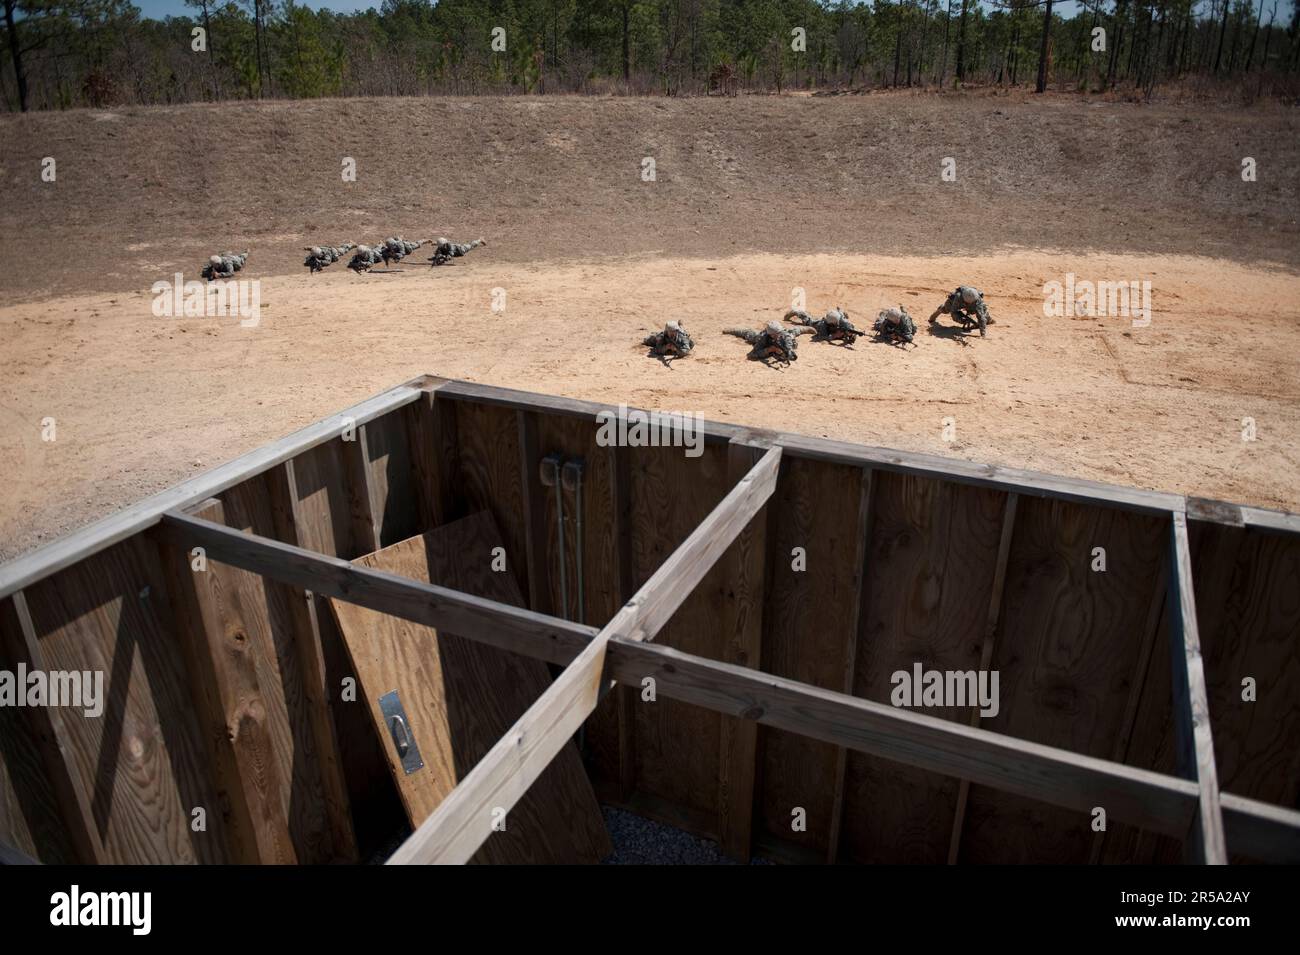 Soldiers in basic training move tactically as a squad during close quarters combat training. Stock Photo